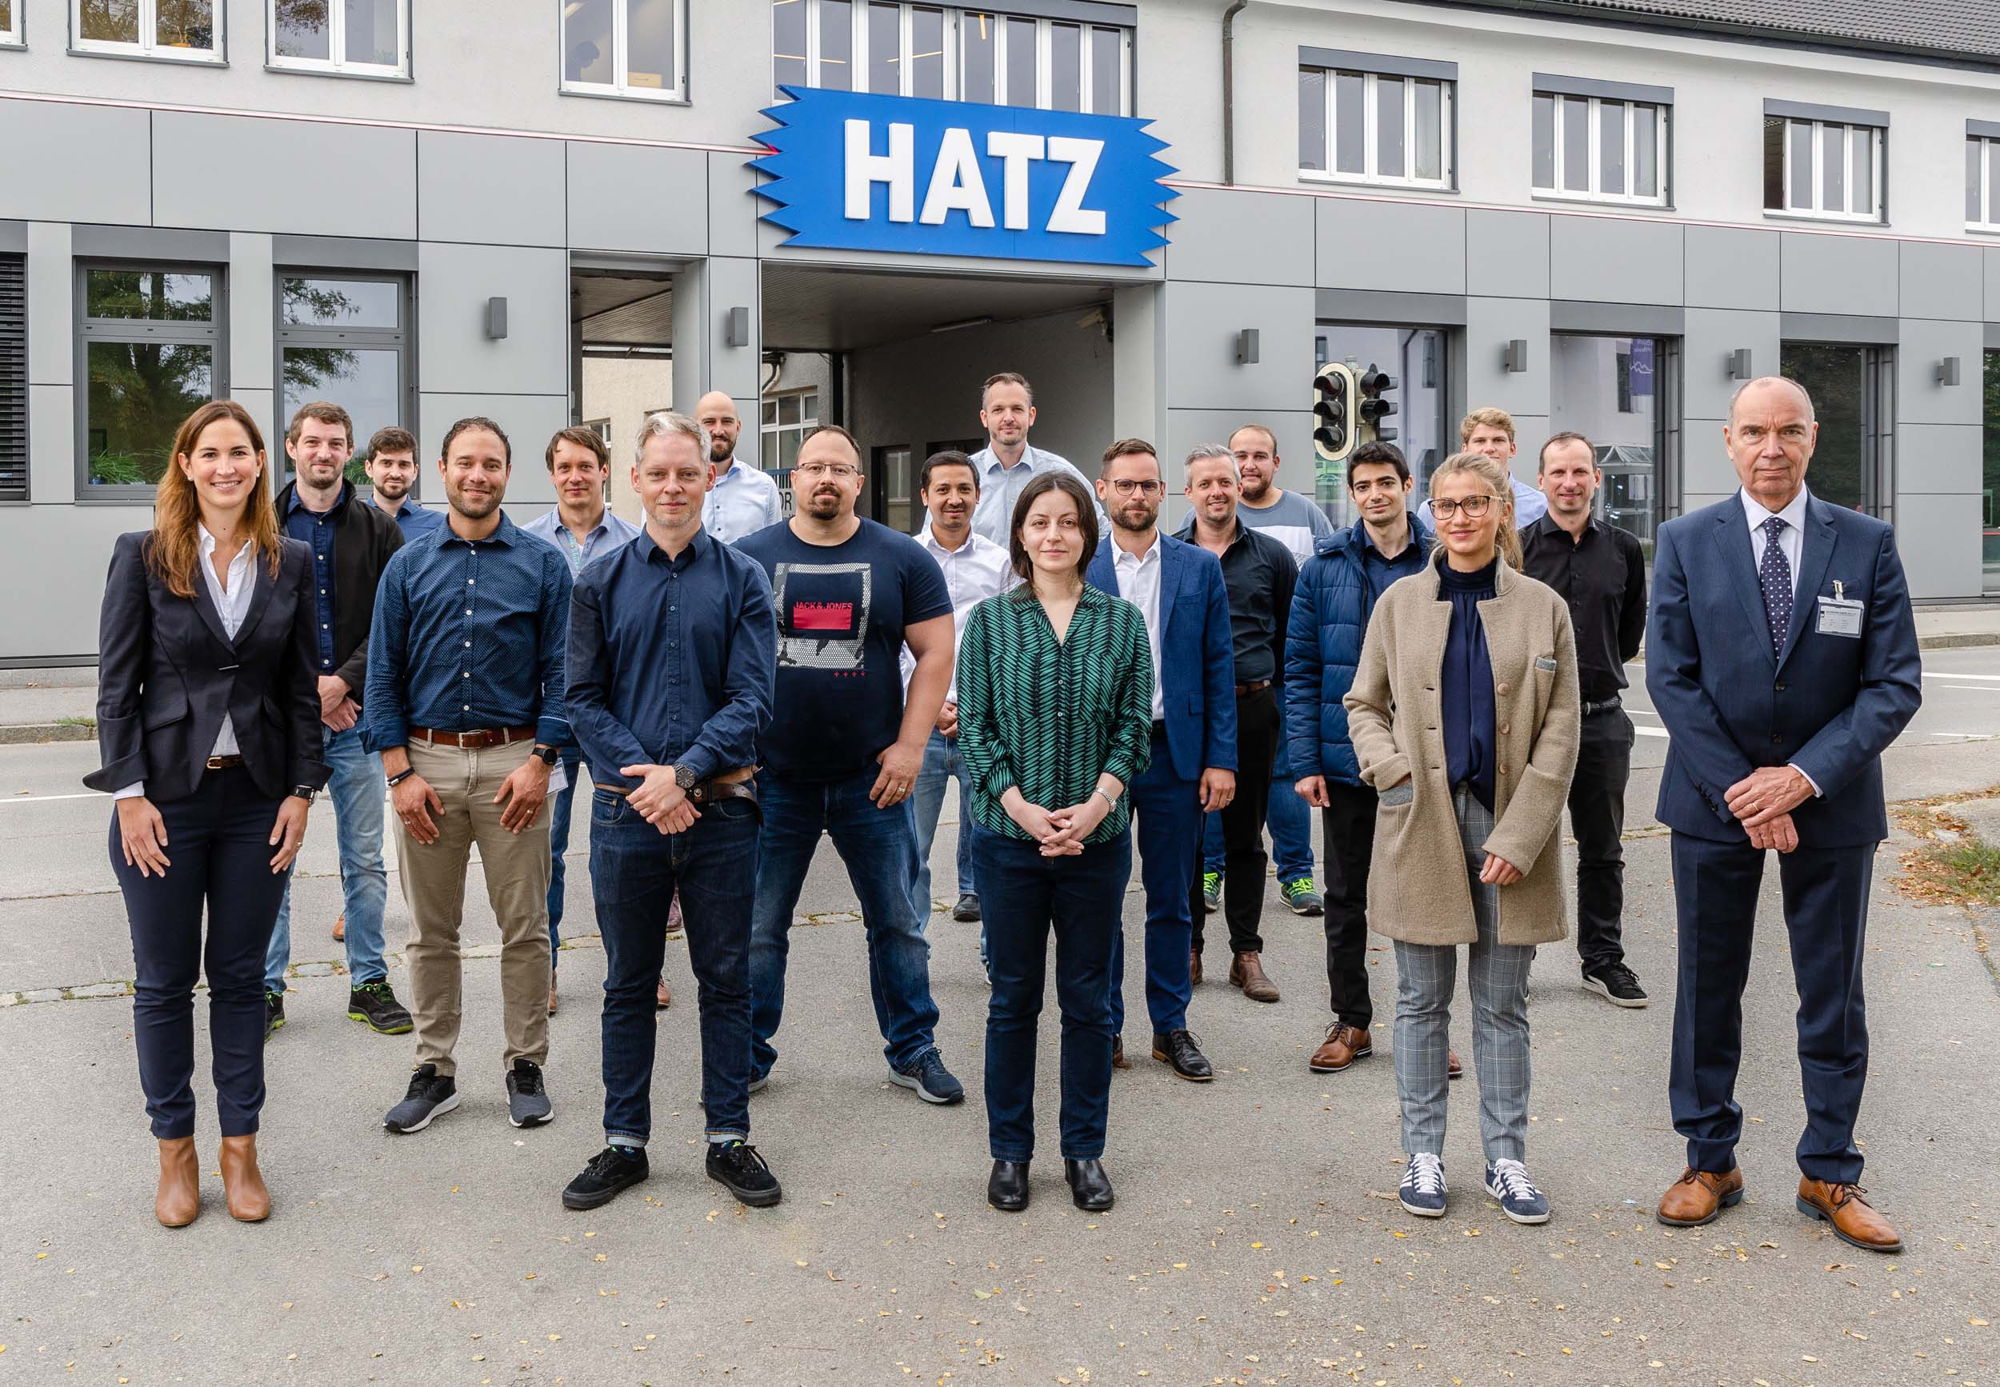 The KIM project team, consisting of Sontheim and Hatz specialists under the management of General Manager Bruno Sontheim (right) and Dr. Maren Hellwig (left), who is in charge of Digital Business Development at Hatz, in front of the Hatz headquarters in Ruhstorf, Lower Bavaria, Germany.